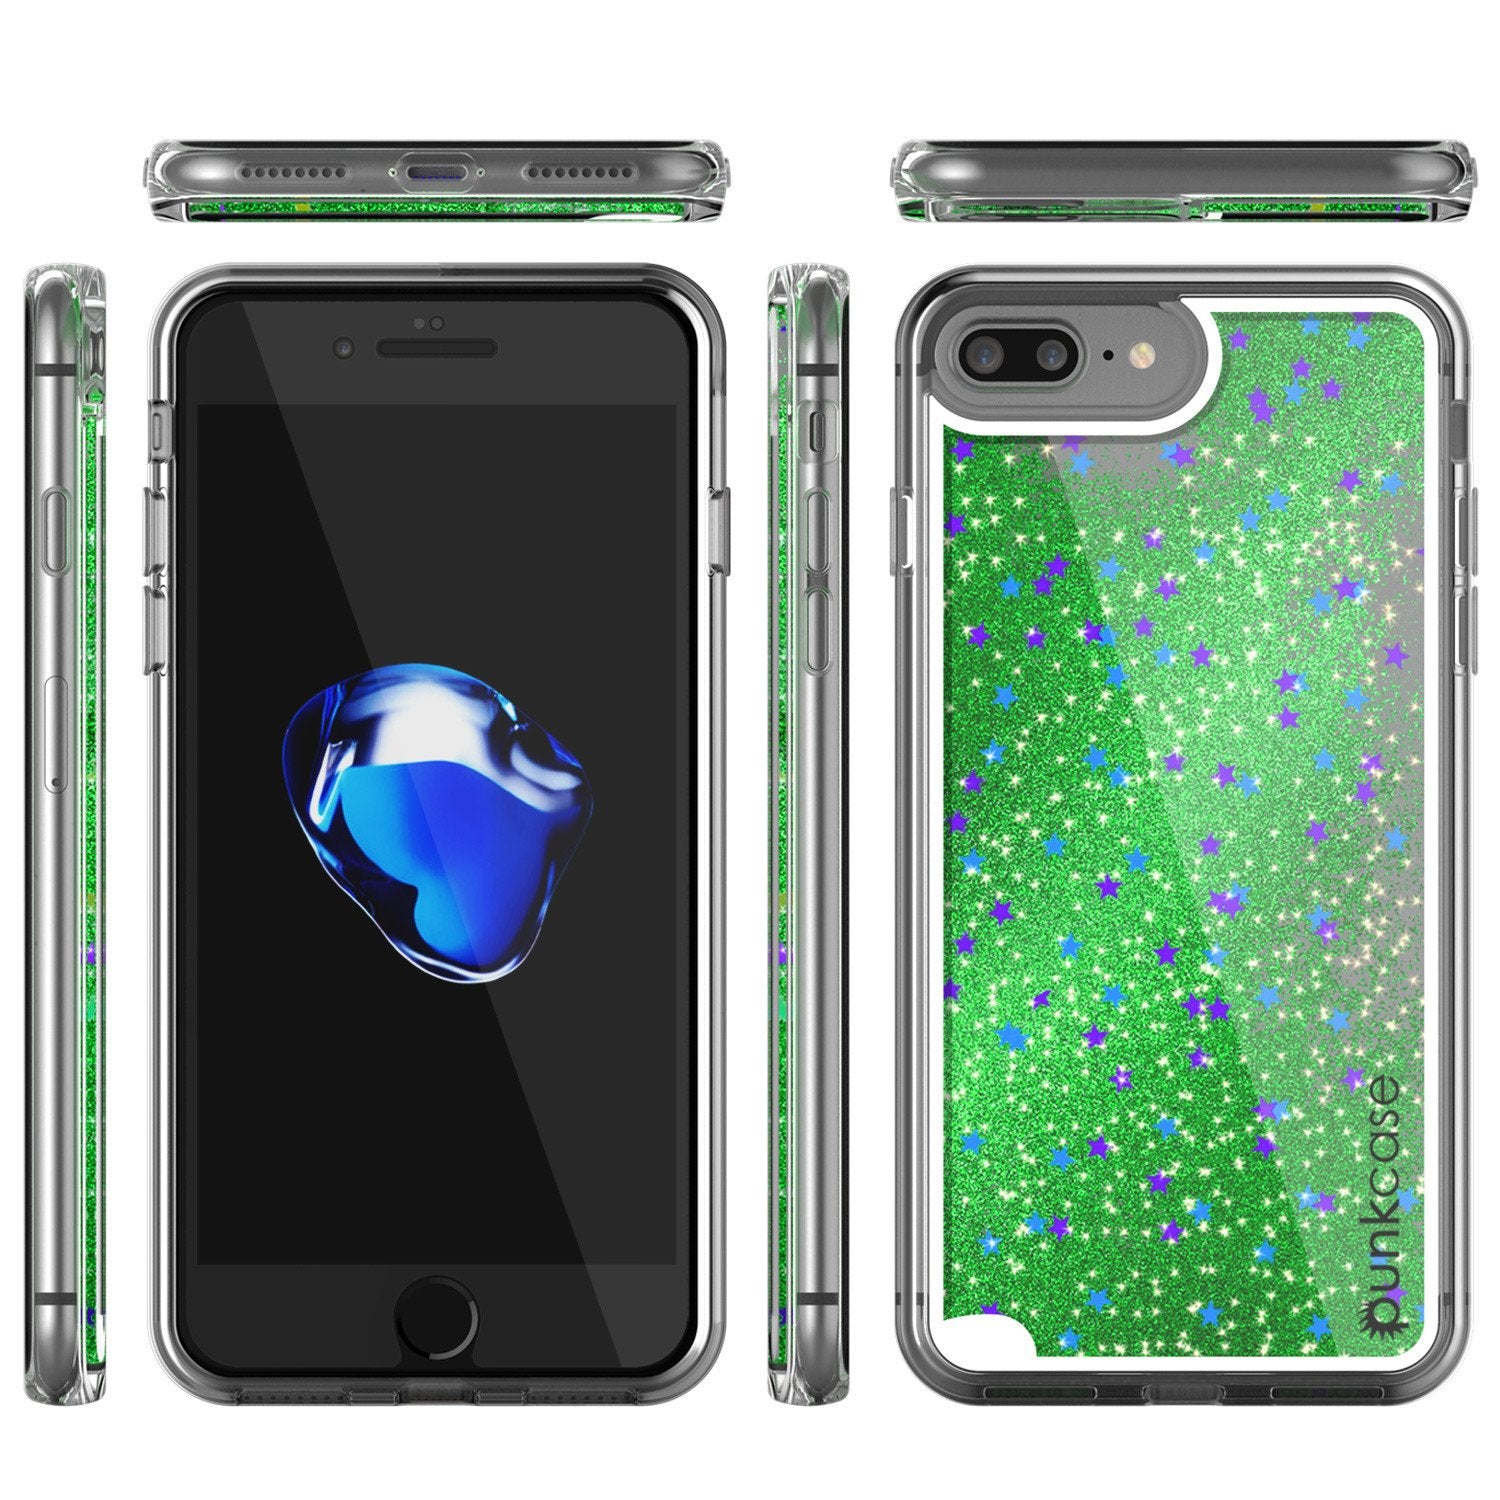 iPhone 7 Plus Case, Punkcase [Liquid Green Series] Protective Dual Layer Floating Glitter Cover with lots of Bling & Sparkle + 0.3mm Tempered Glass Screen Protector for Apple iPhone 7s Plus